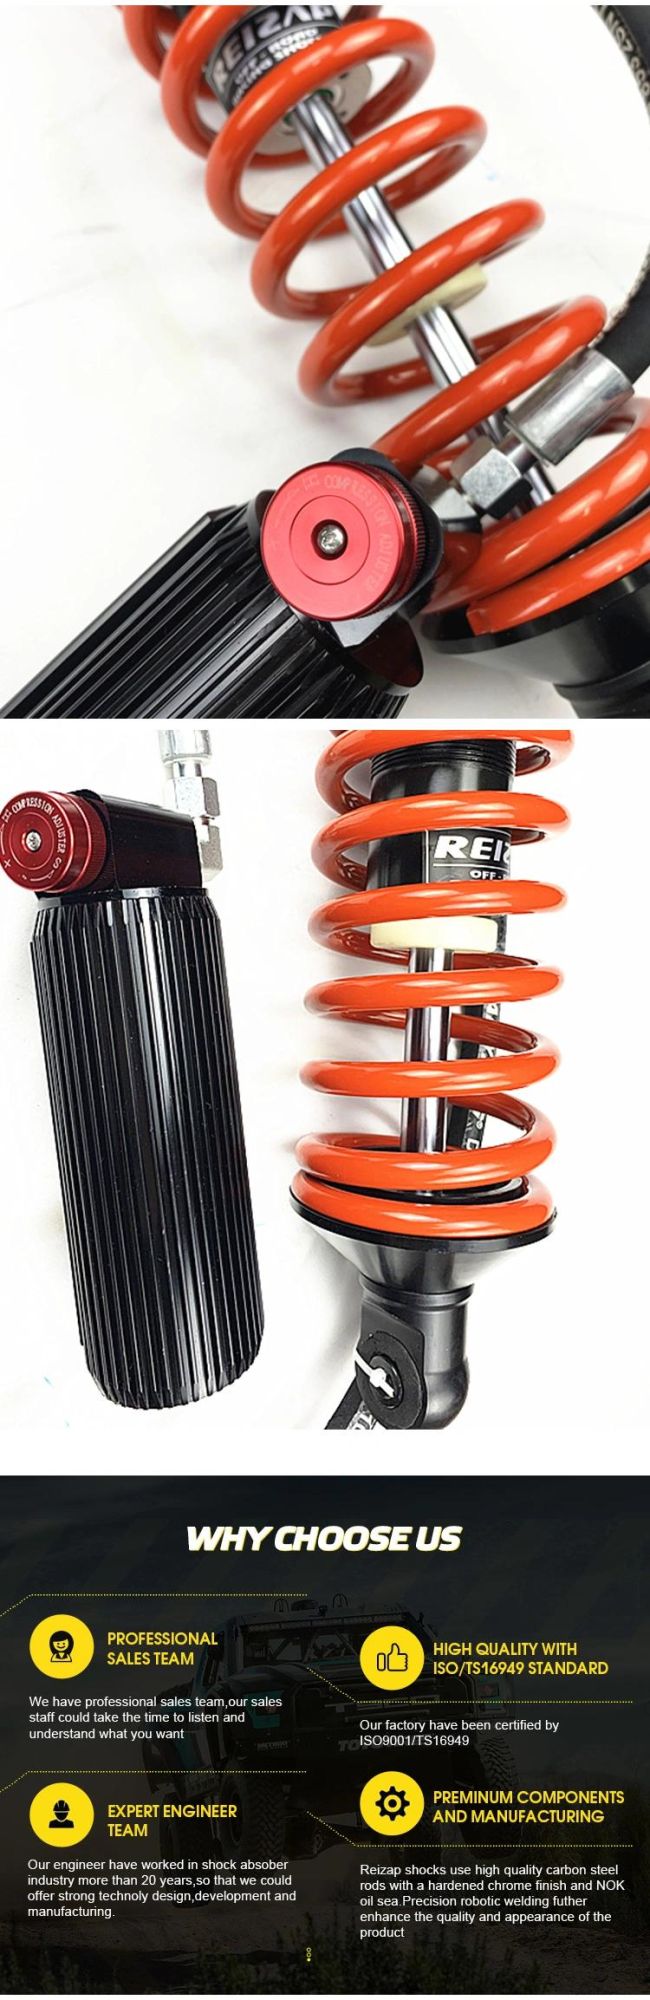 Good Quality China Factory Price Adjustable 2.25 Body 12 Travel 4X4 Coilover Shock Absorber Offroad Racing Shocks